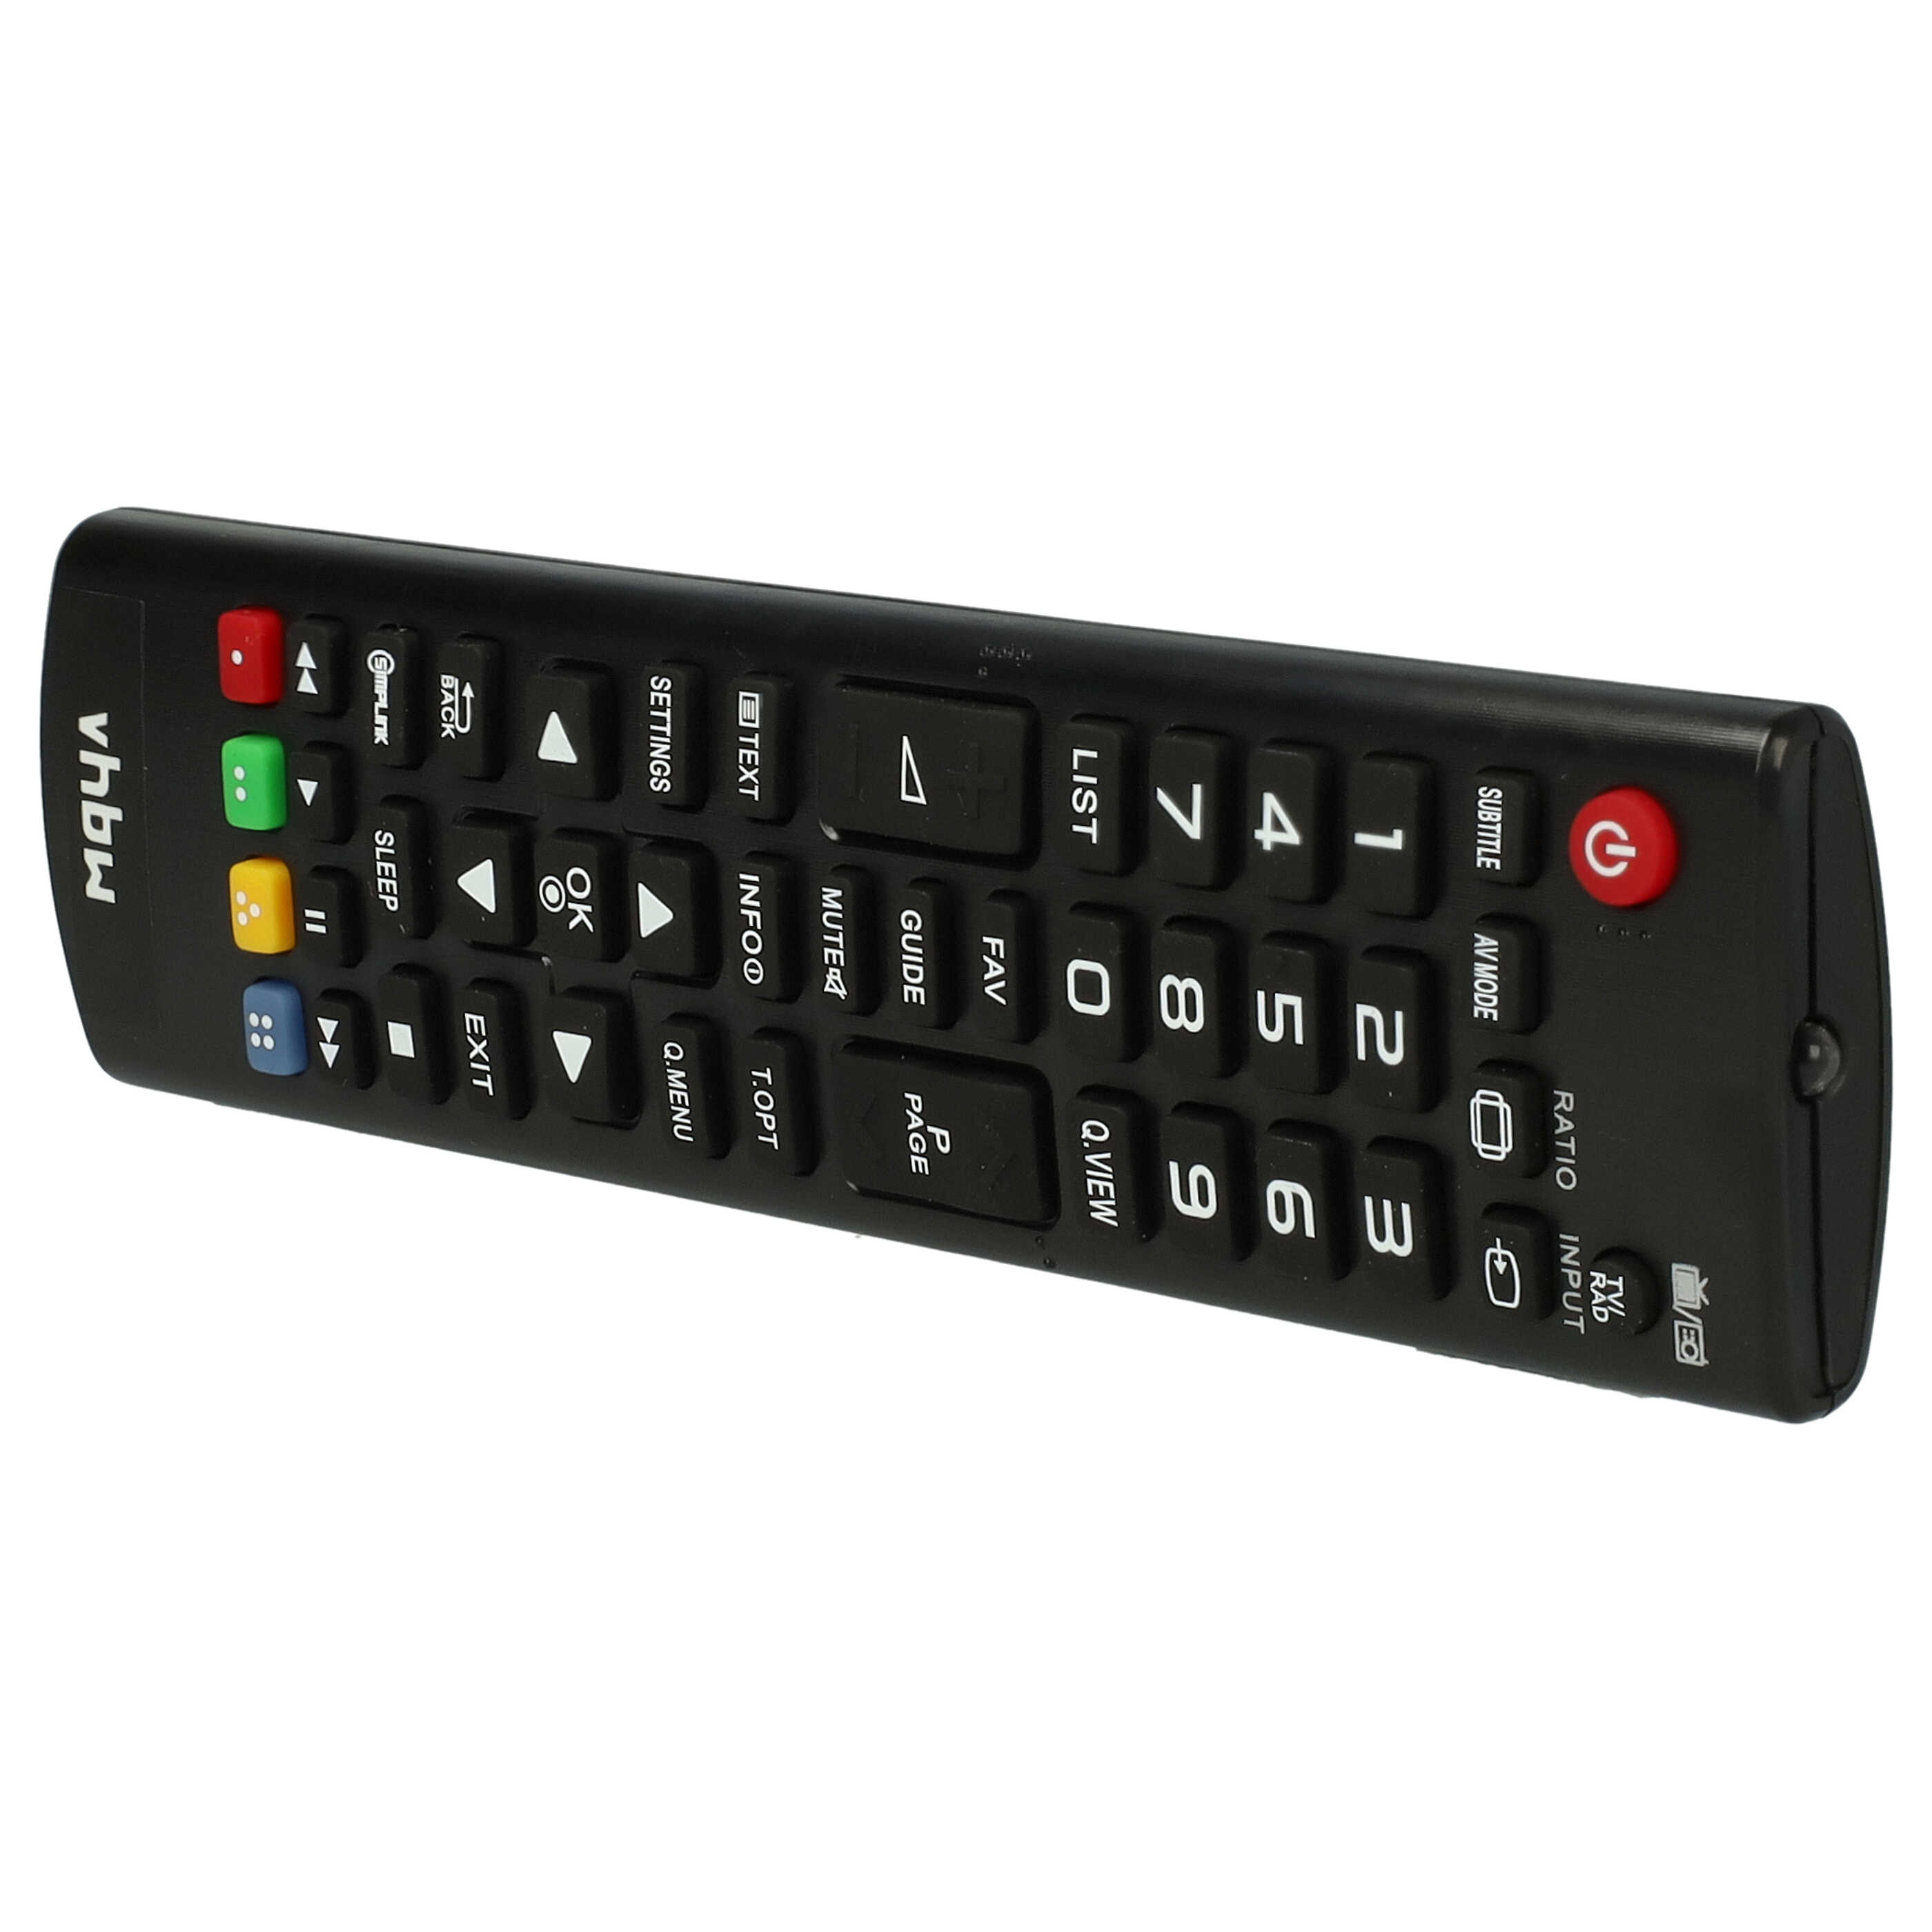 Remote Control replaces LG AKB73715605, AKB73715606 for LG TV